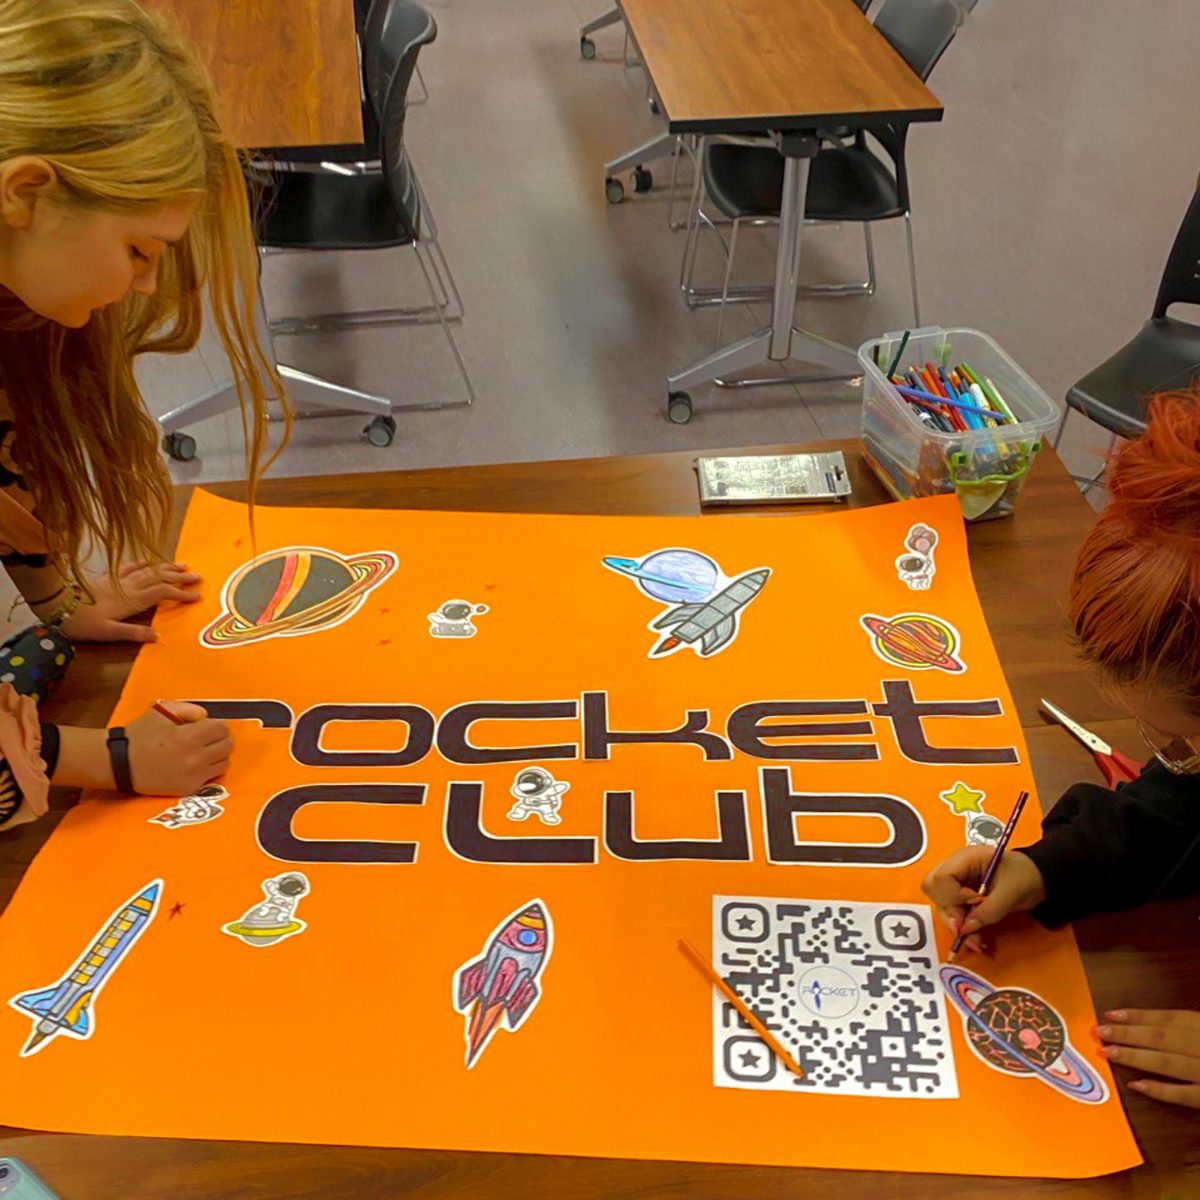 Rocket club attendees design their posters for Club Day. This is just a place where they [rocket club attendees] can find people who are like them in the mind, rocket club president Sonya Vishnyakova said.